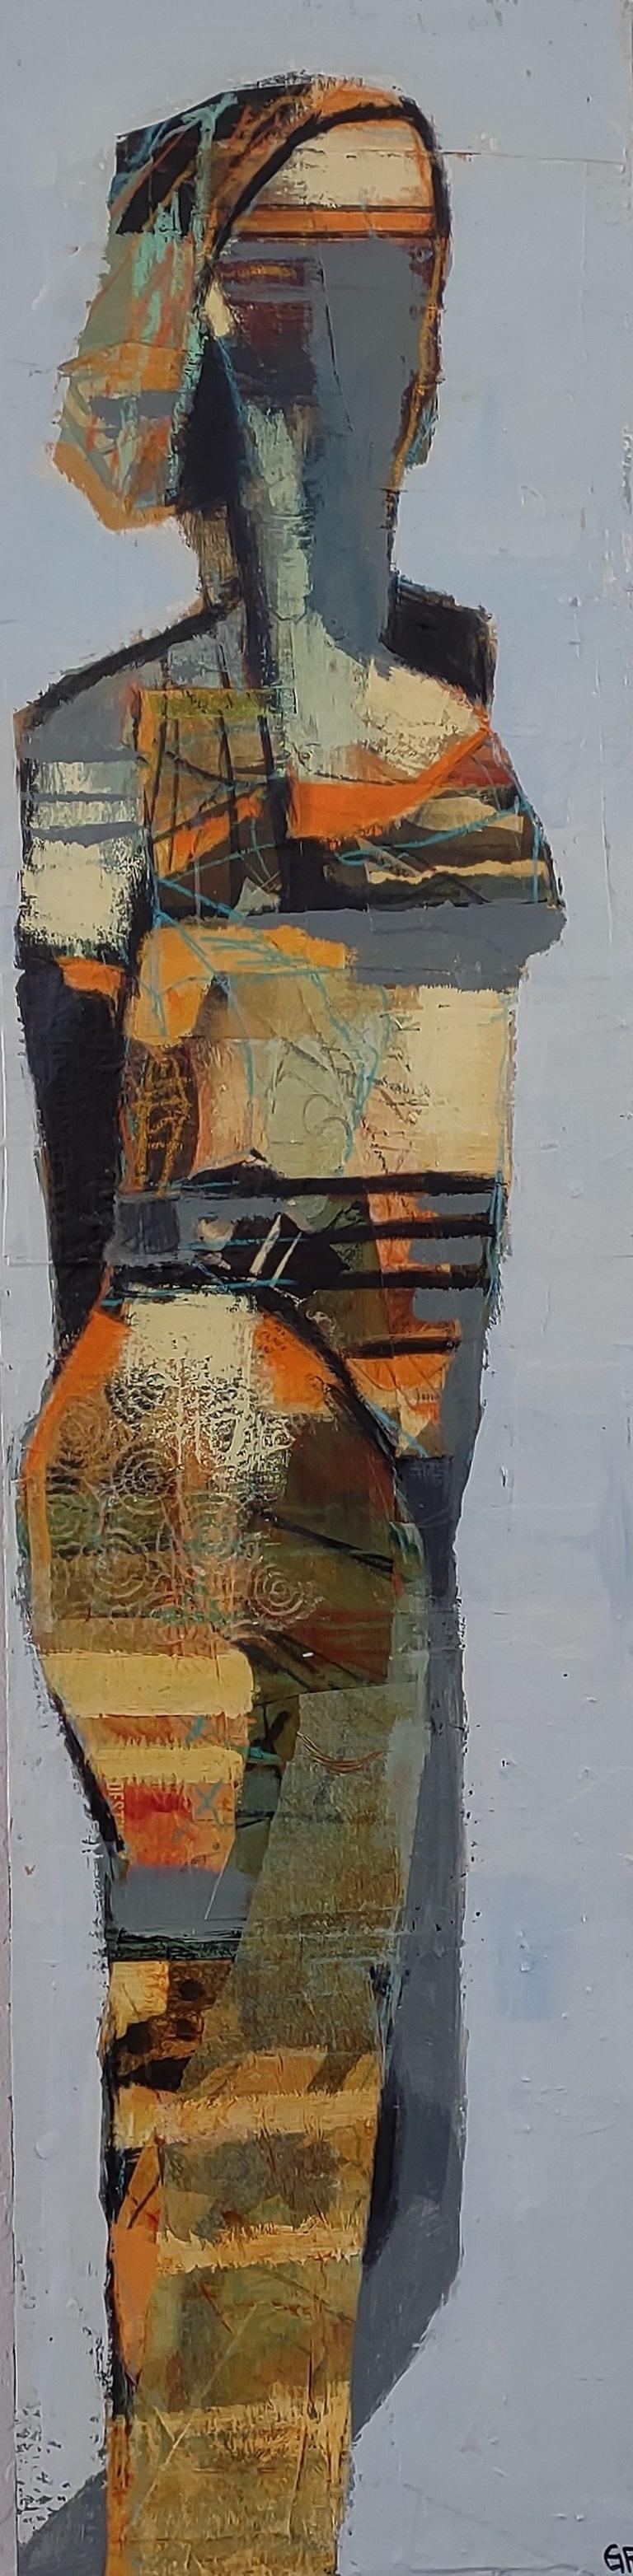 Collage Figure #2, Abstract Painting - Mixed Media Art by Gail Ragains